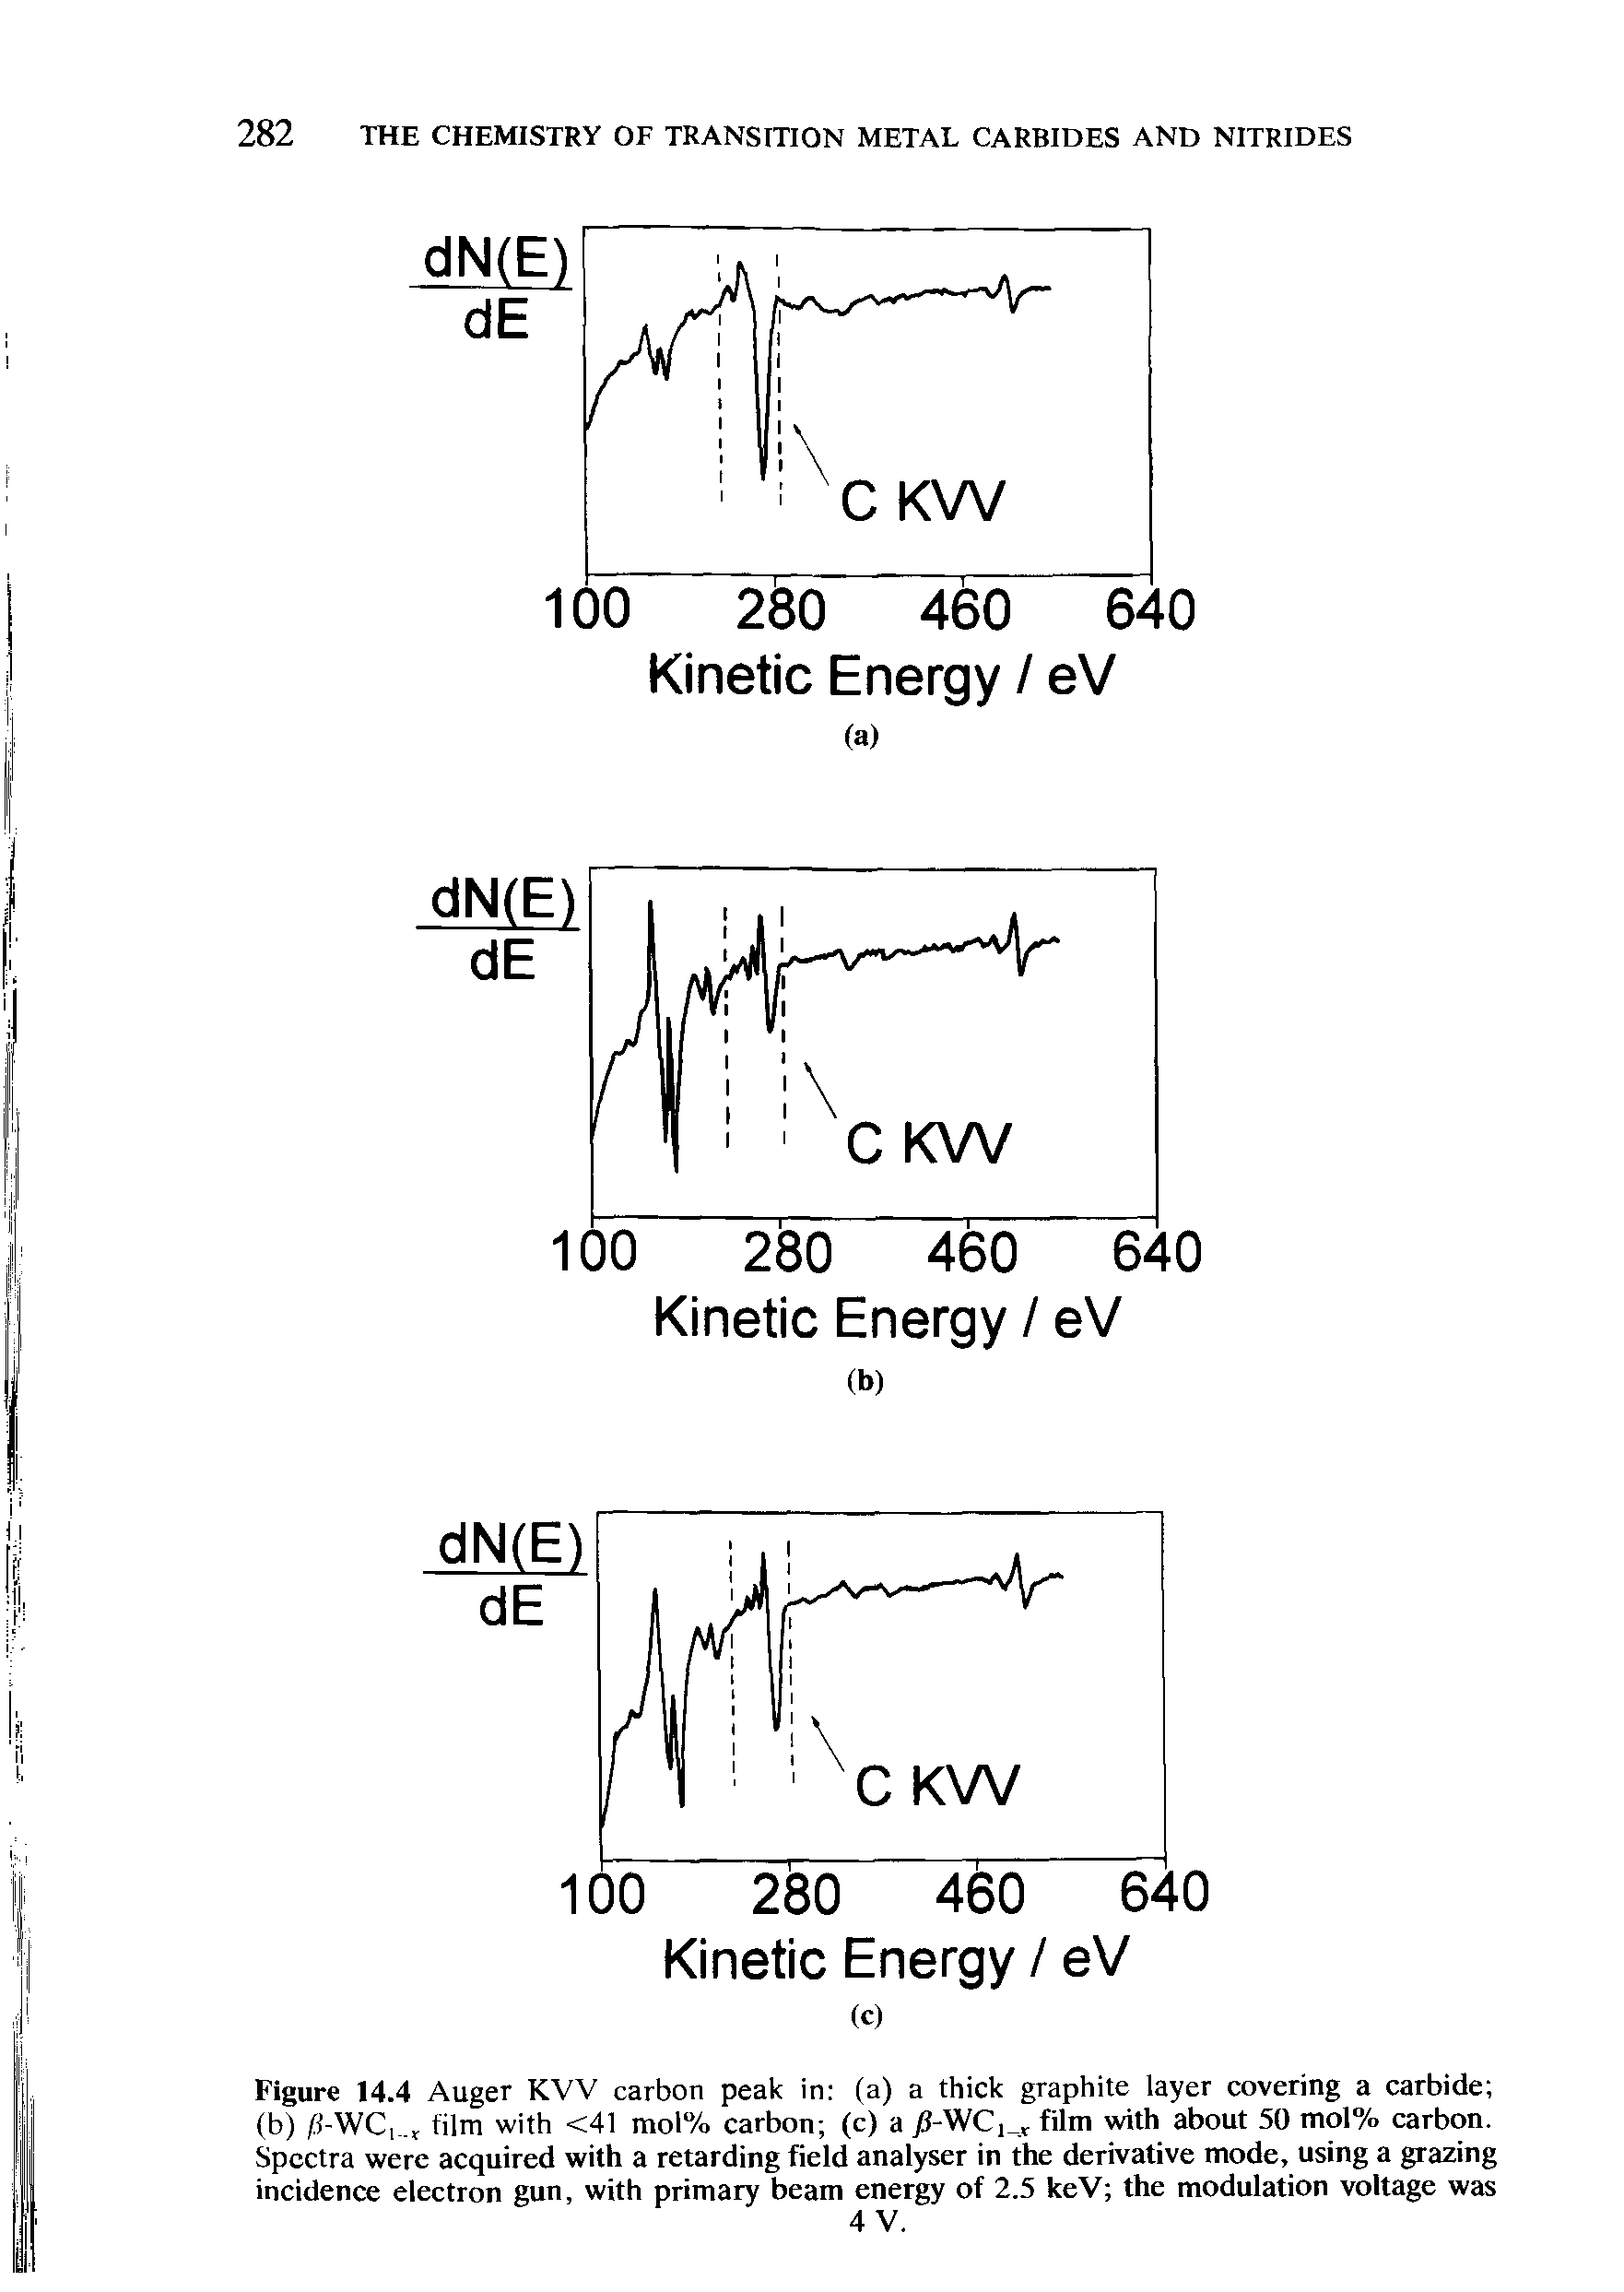 Figure 14.4 Auger KVV carbon peak in (a) a thick graphite layer covering a carbide (b) /J-WC, film with <41 mol% carbon (c) a /i-WC, v film with about 50 mol% carbon. Spectra were acquired with a retarding field analyser in the derivative mode, using a grazing incidence electron gun, with primary beam energy of 2.5 keV the modulation voltage was...